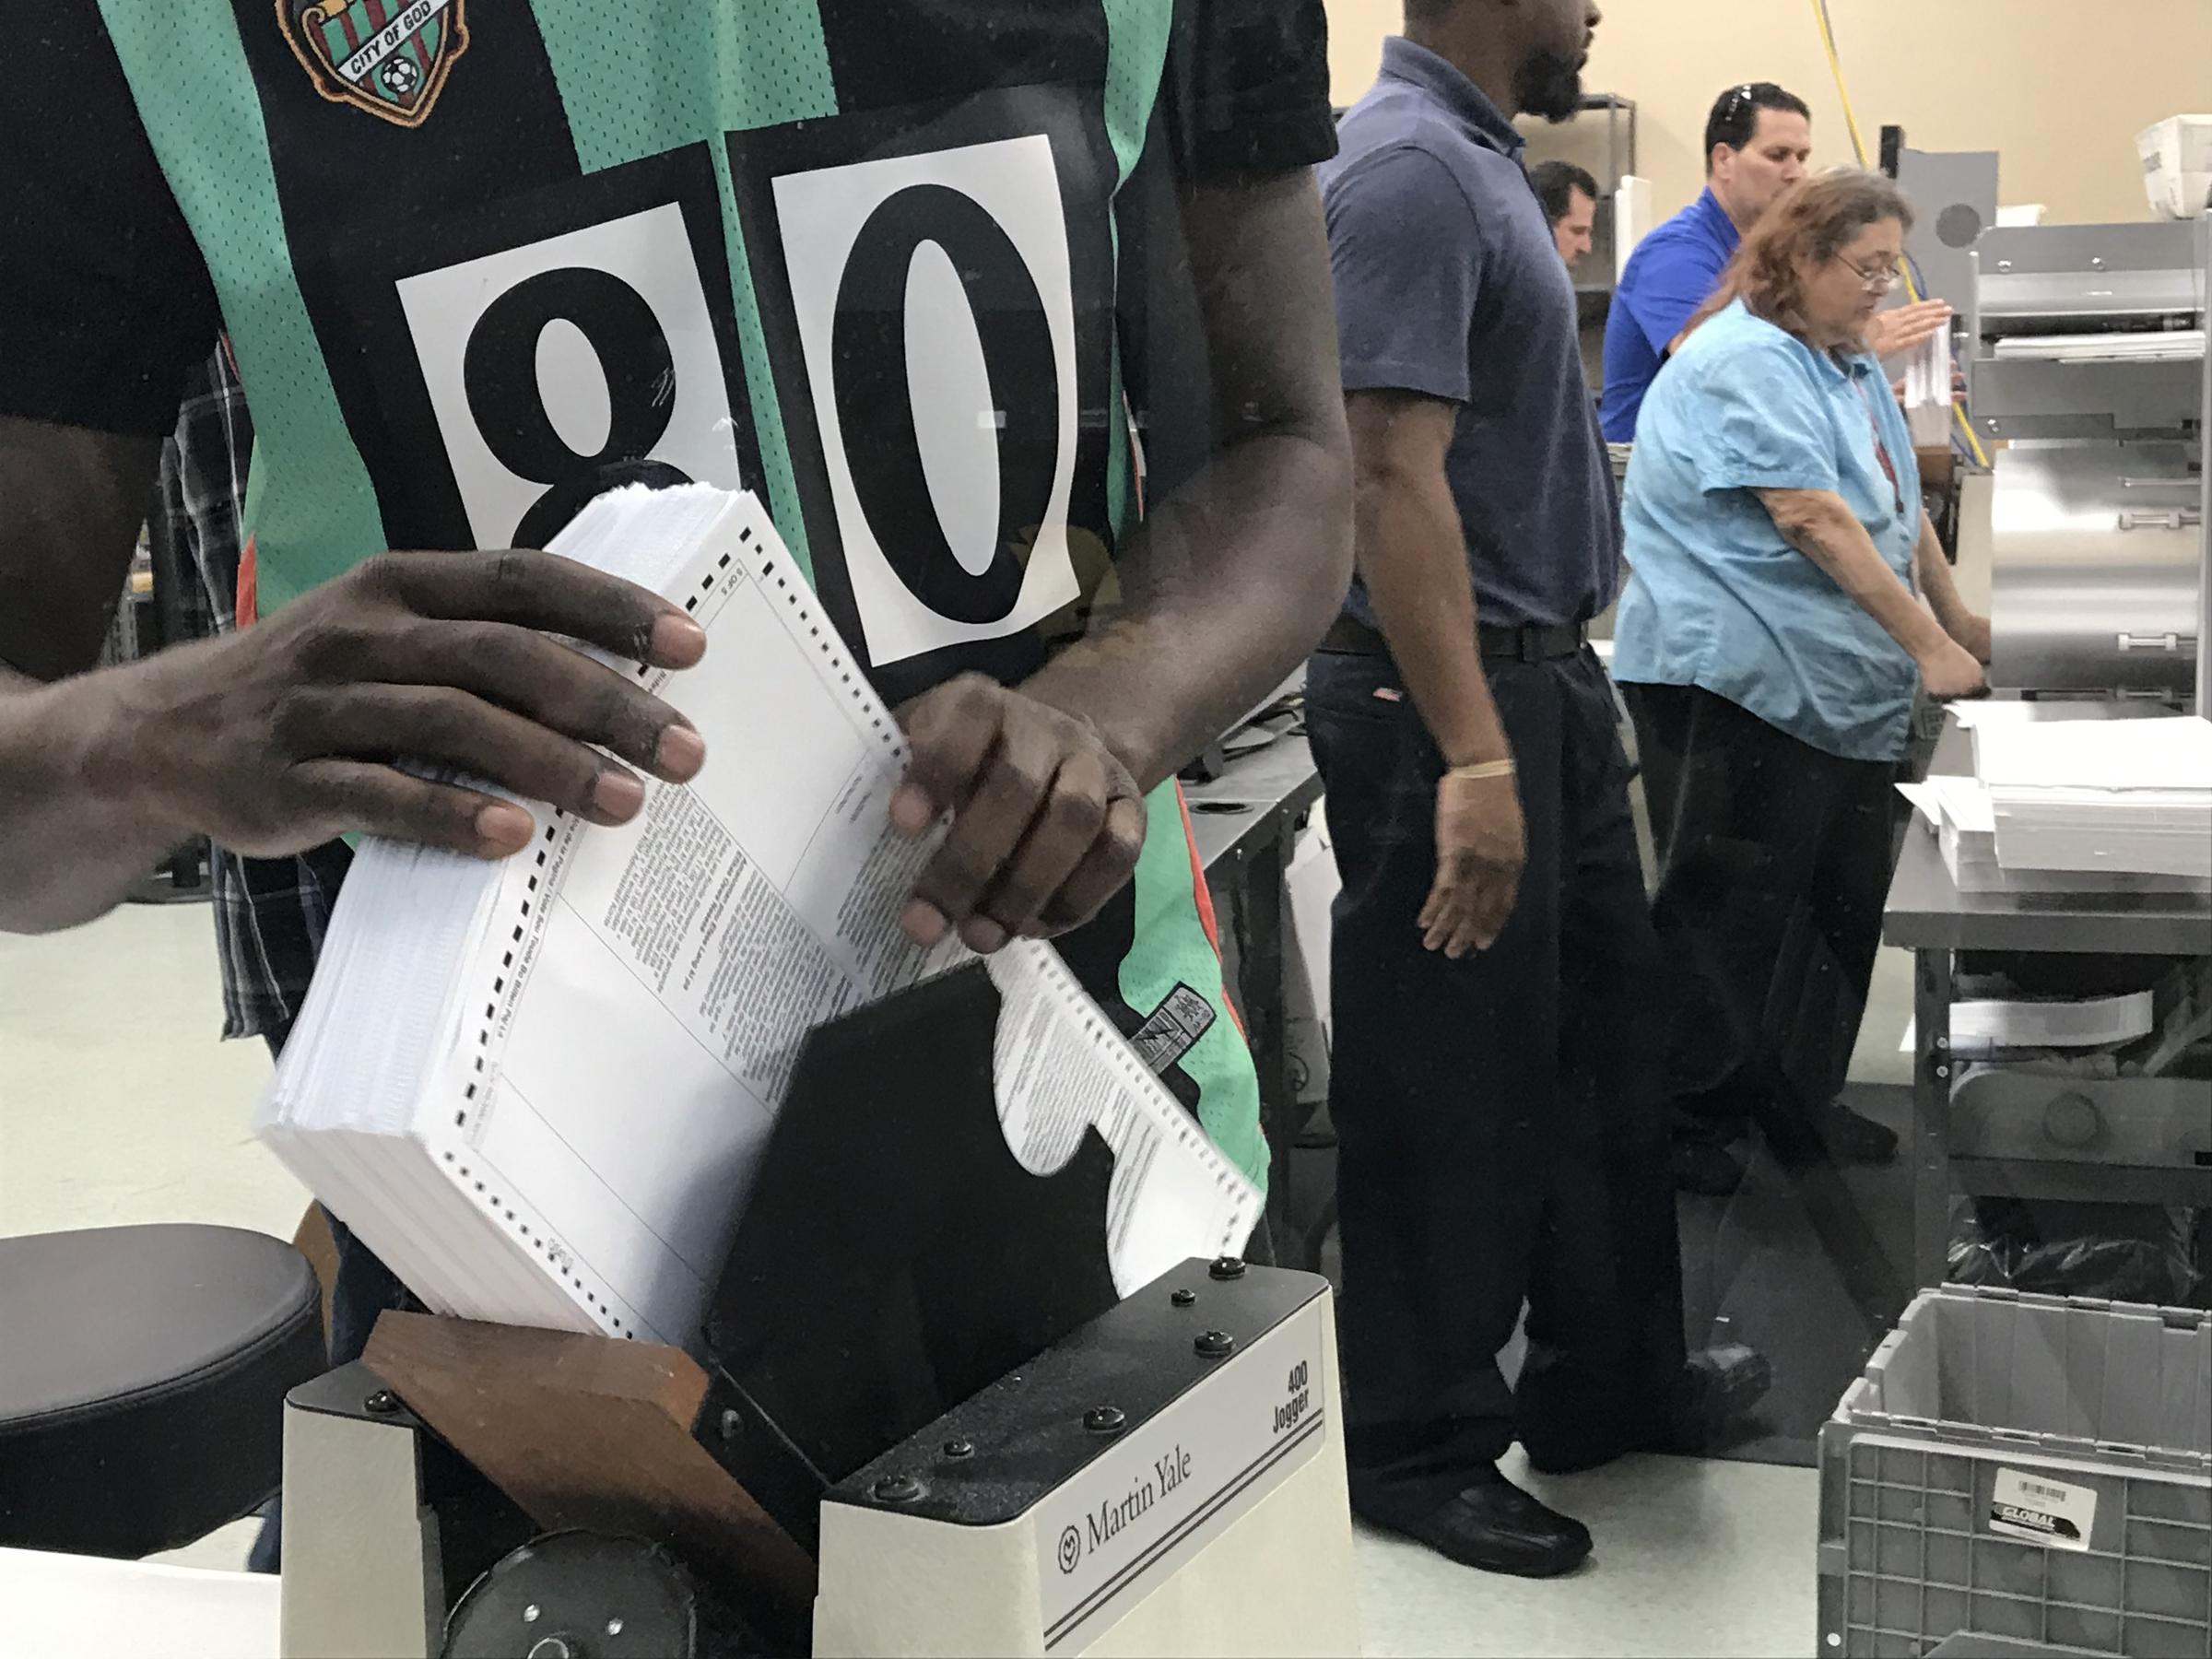 Expert How Ballot Design Could Impact Broward County Election Results